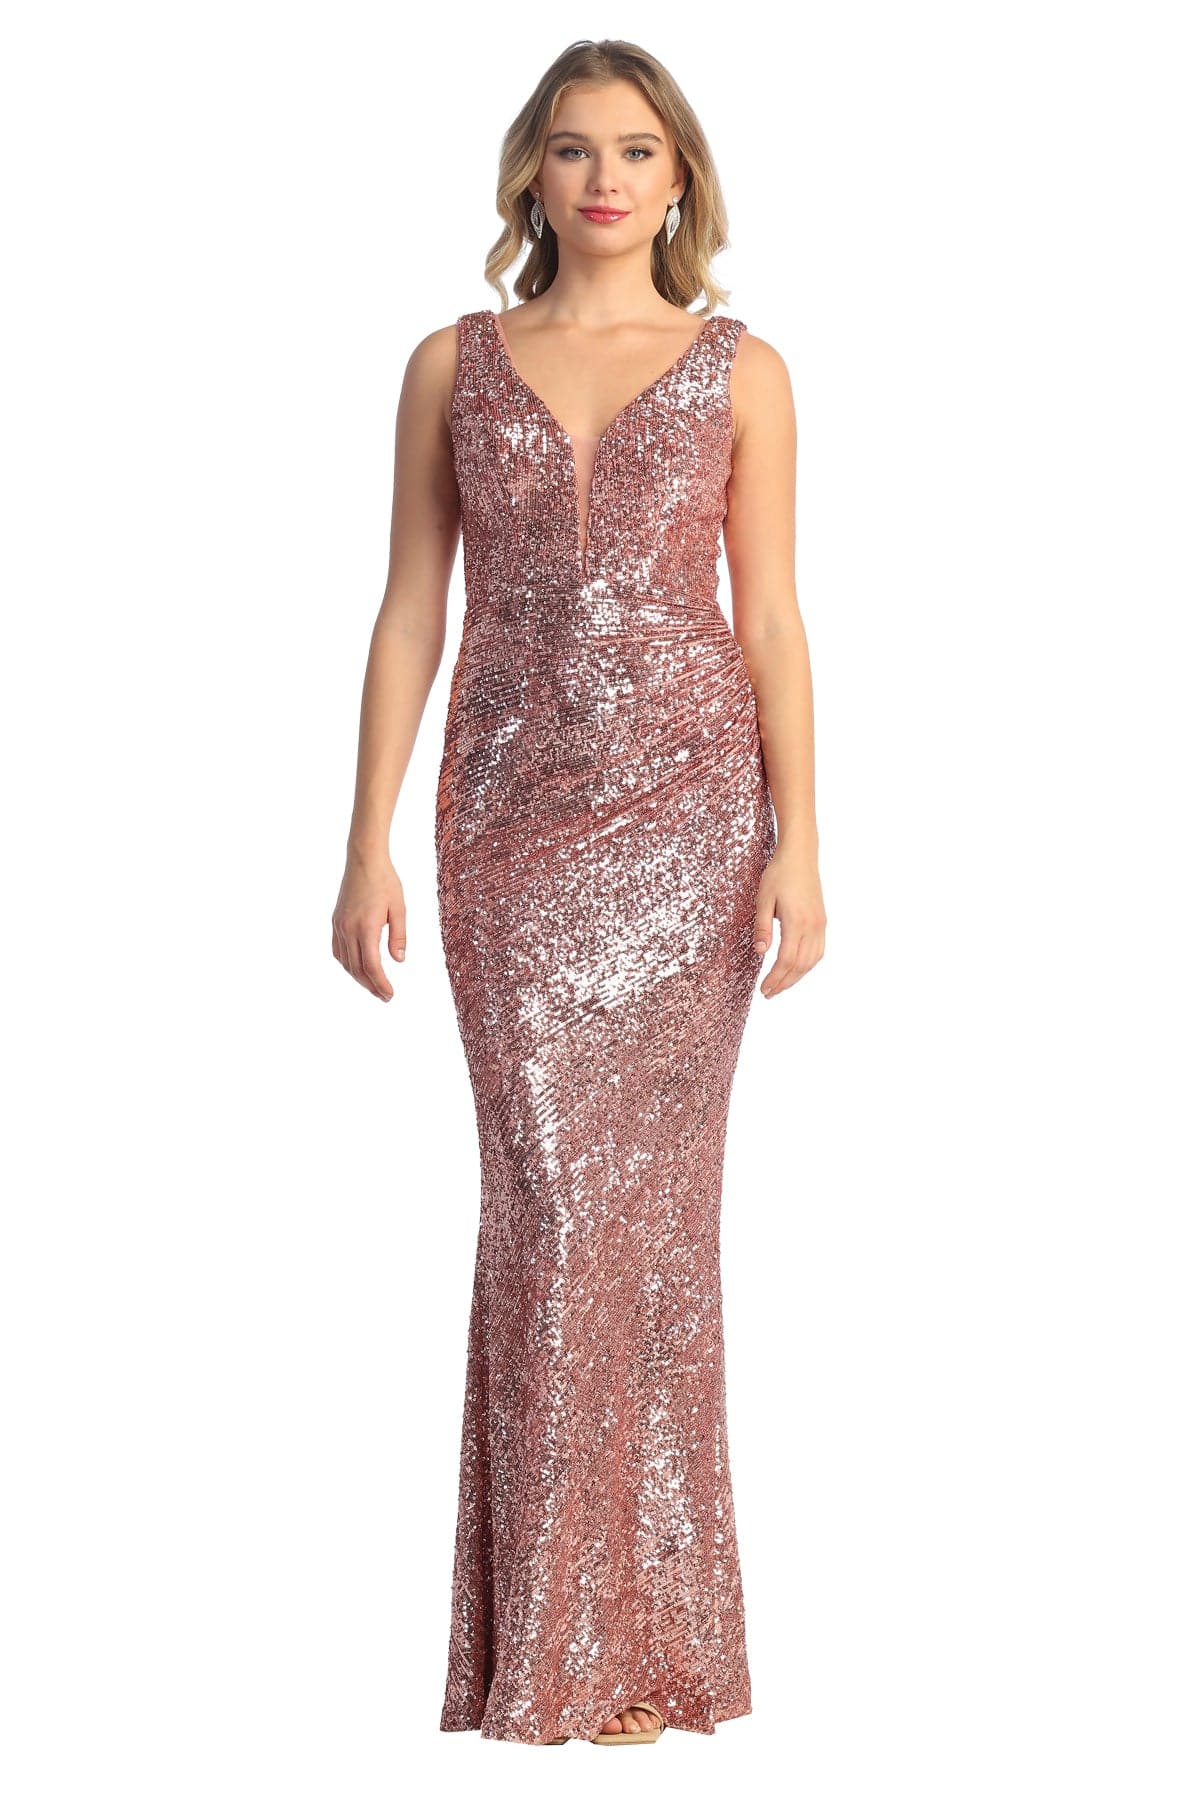 Cindy Collection 1745 Sparkling Mermaid Dress - NORMA REED